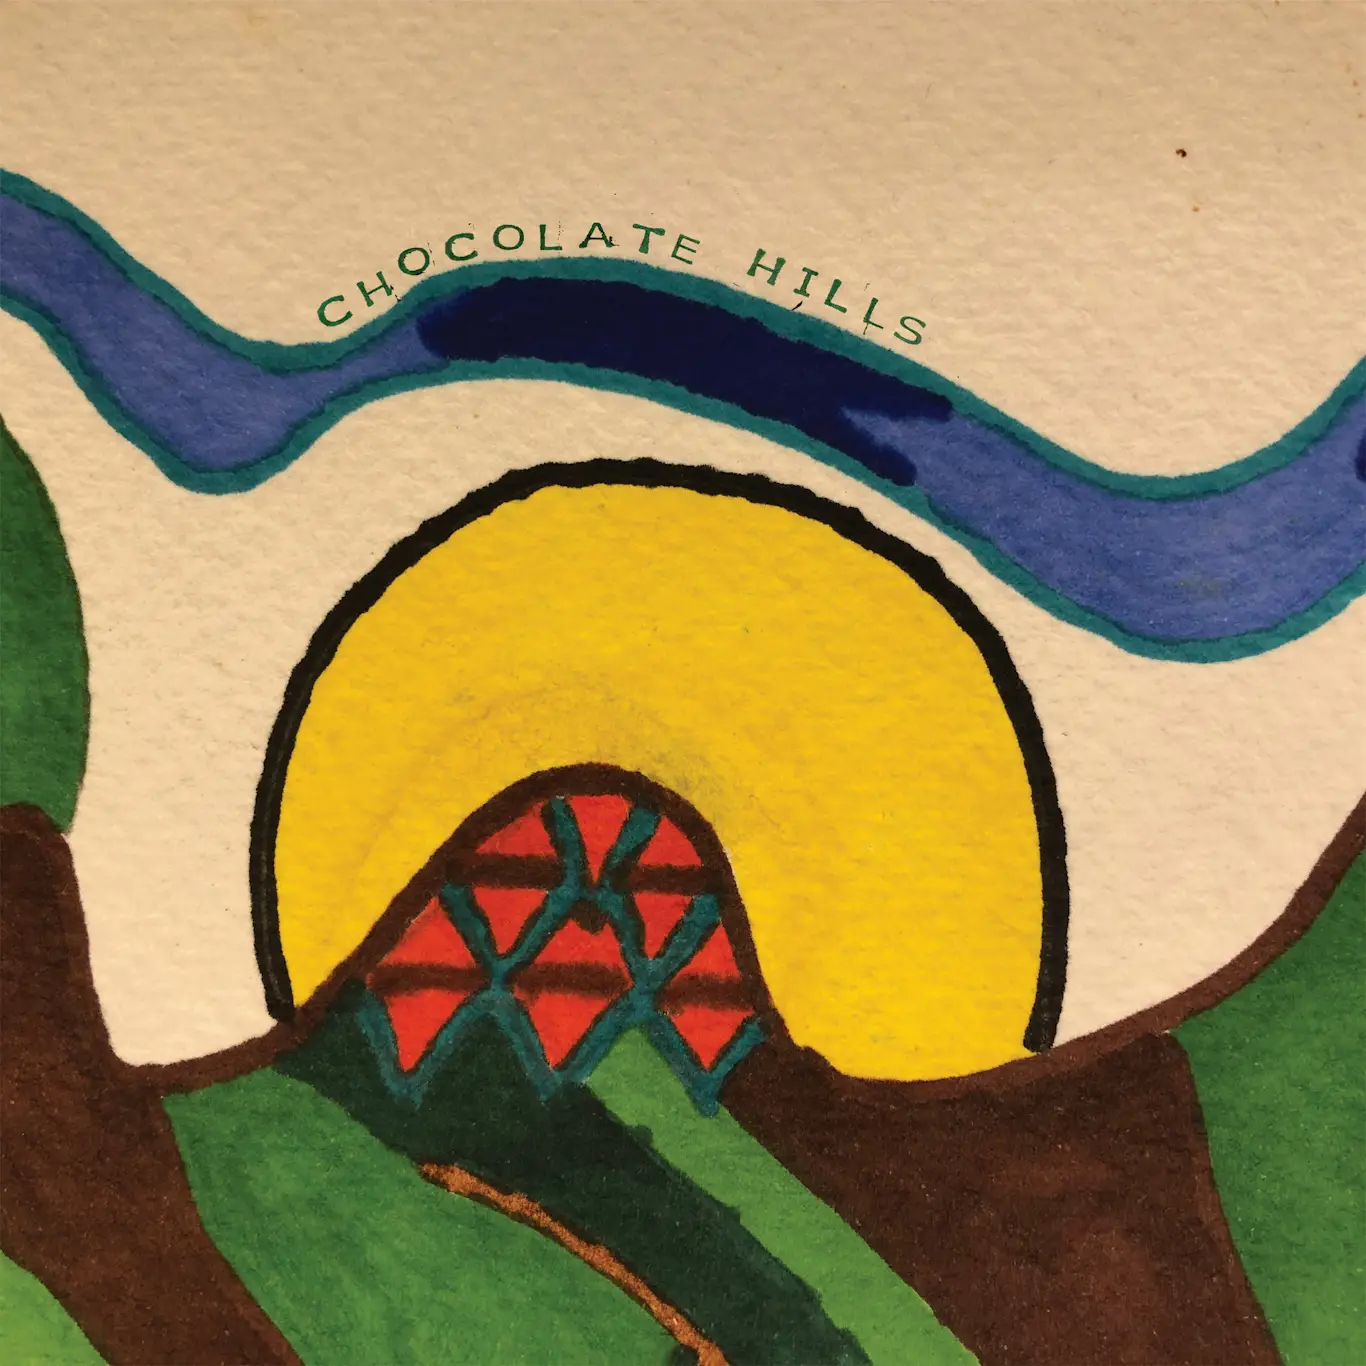 THE ORB’s Alex Paterson set to release new CHOCOLATE HILLS album